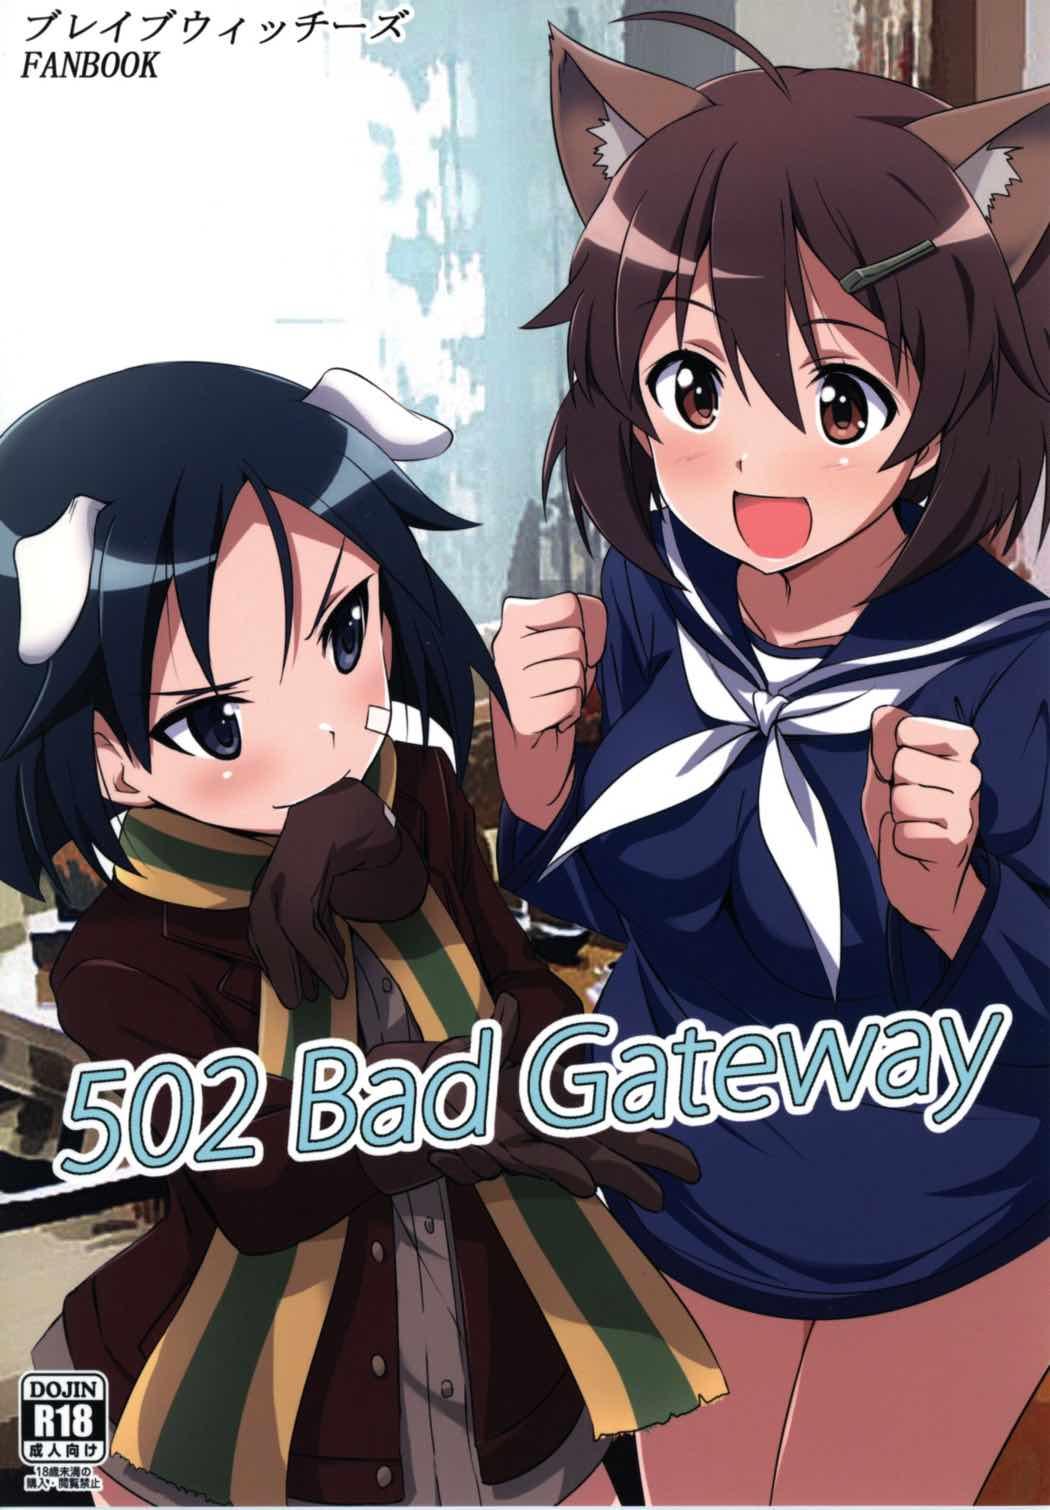 Buttfucking 502 Bad Gateway - Brave witches Reverse - Picture 1